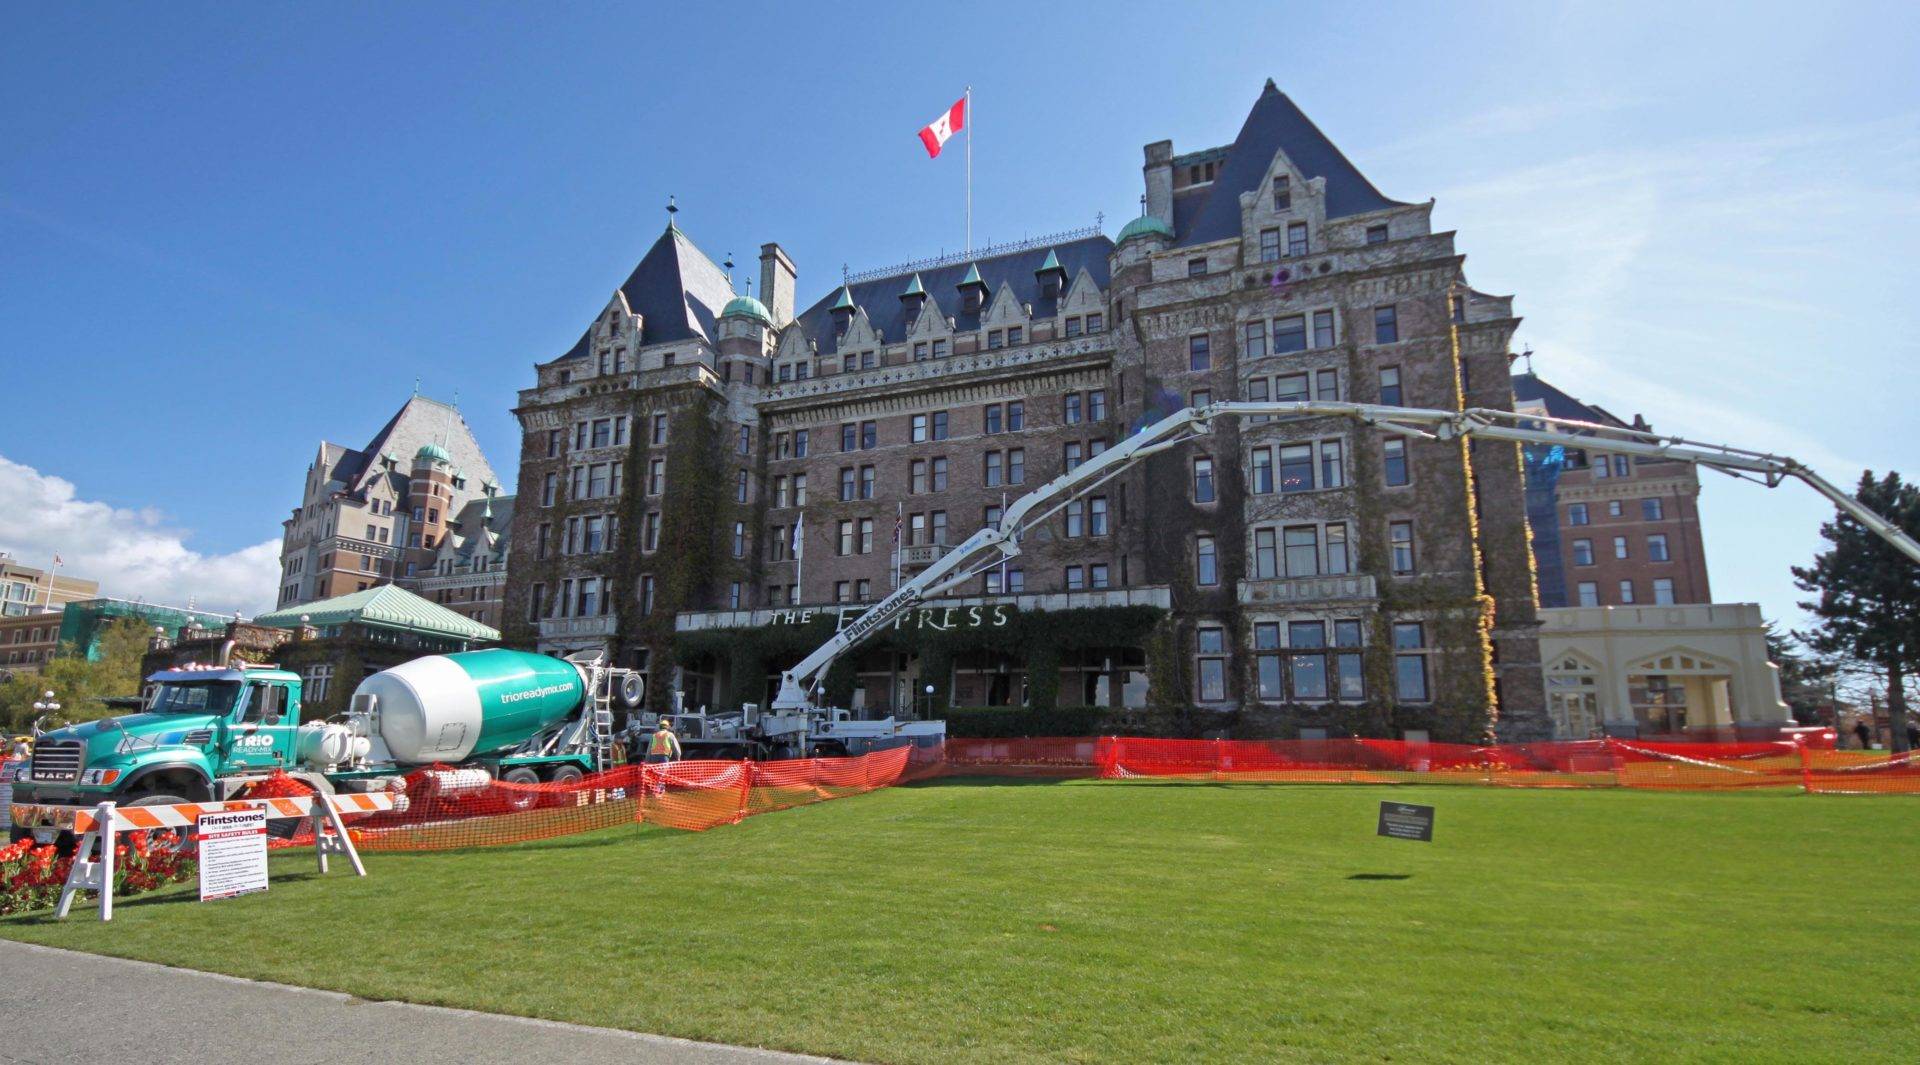 Construction outside of Fairmont Empress Hotel in Victoria